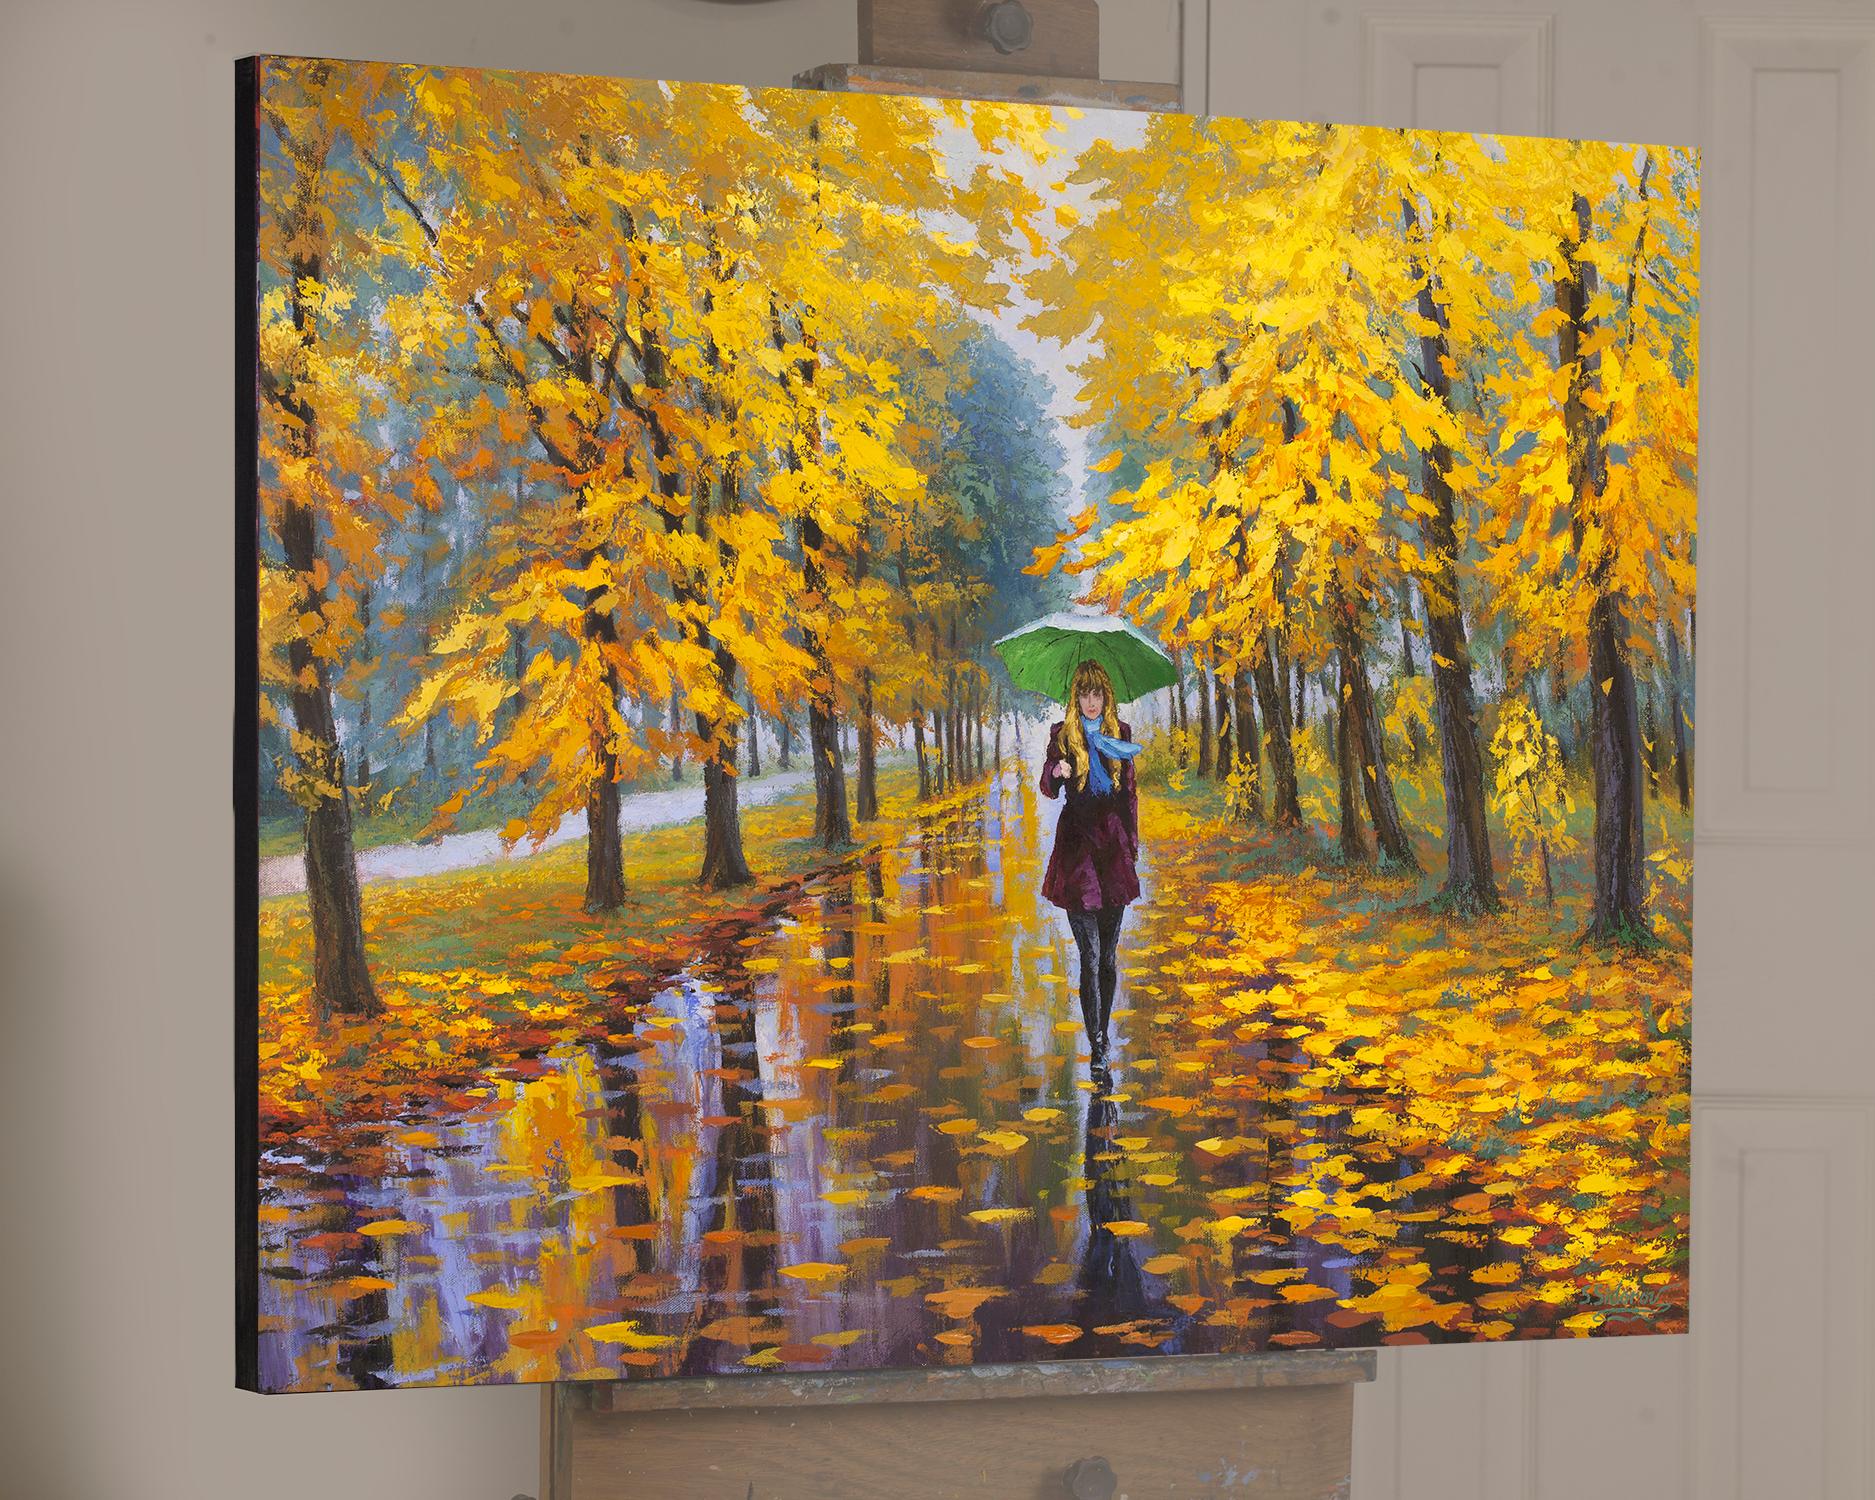 <p>Artist Comments<br>Autumn park; sounds and smells of fall.</p><p>About the Artist<br>Stanislav Sidorov saturates his canvas with the expressive color characteristic of the Russian Realist School. While he is a versatile painter, Stanislav prefers